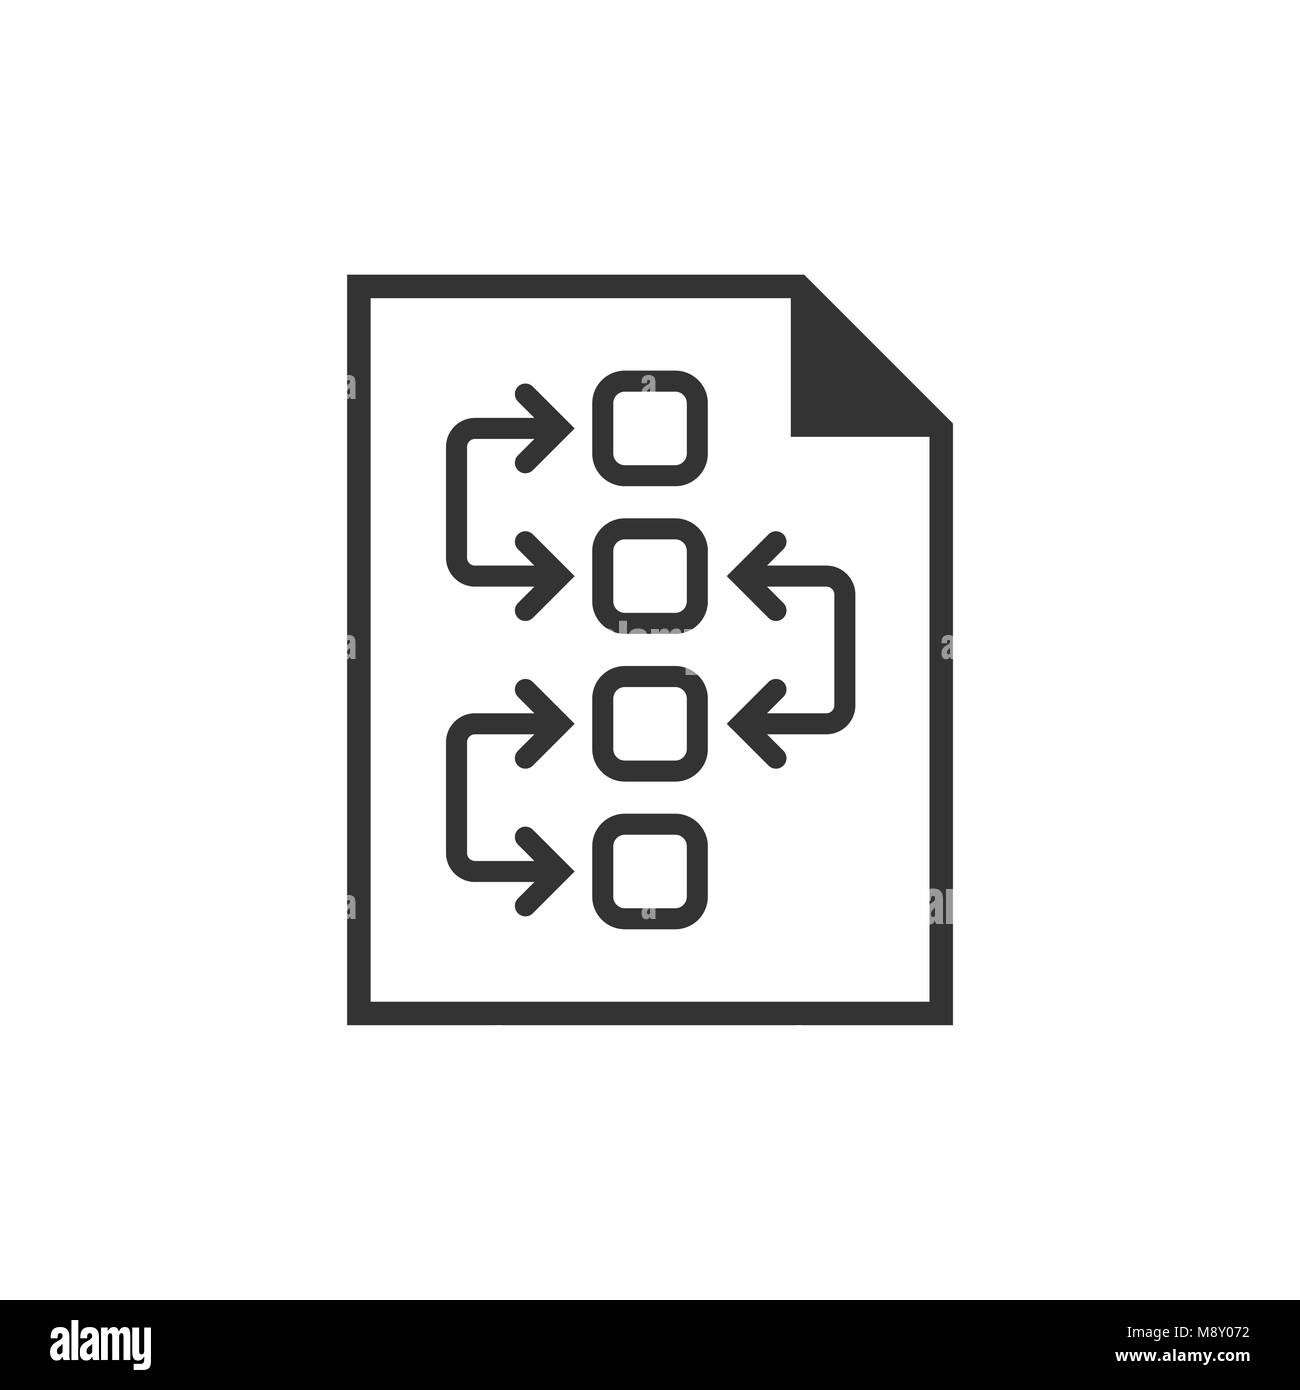 Tactical plan document icon. Vector illustration. Business strategy concept plan pictogram. Stock Vector